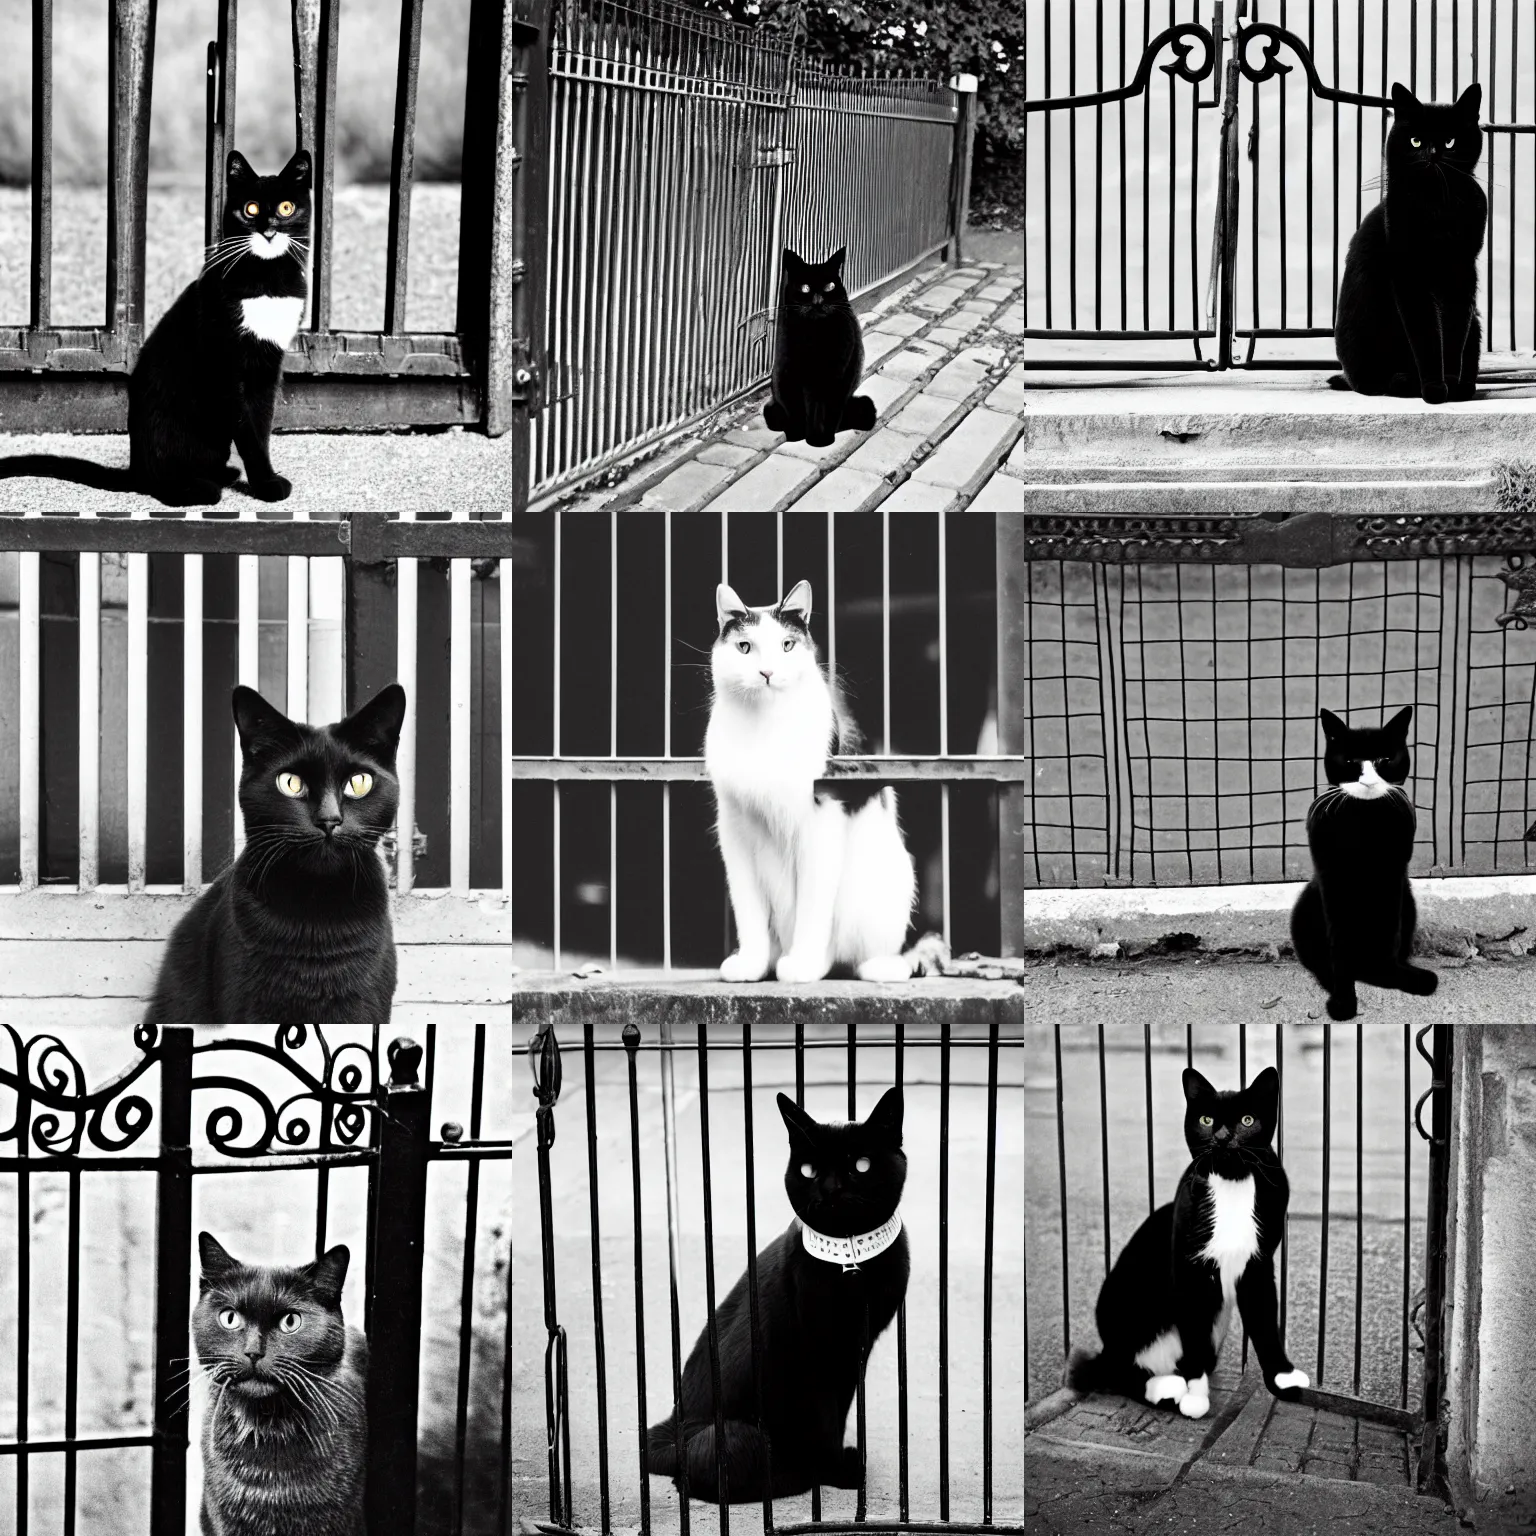 Prompt: A vintage black and white photo of a black cat sat in front of an iron gate